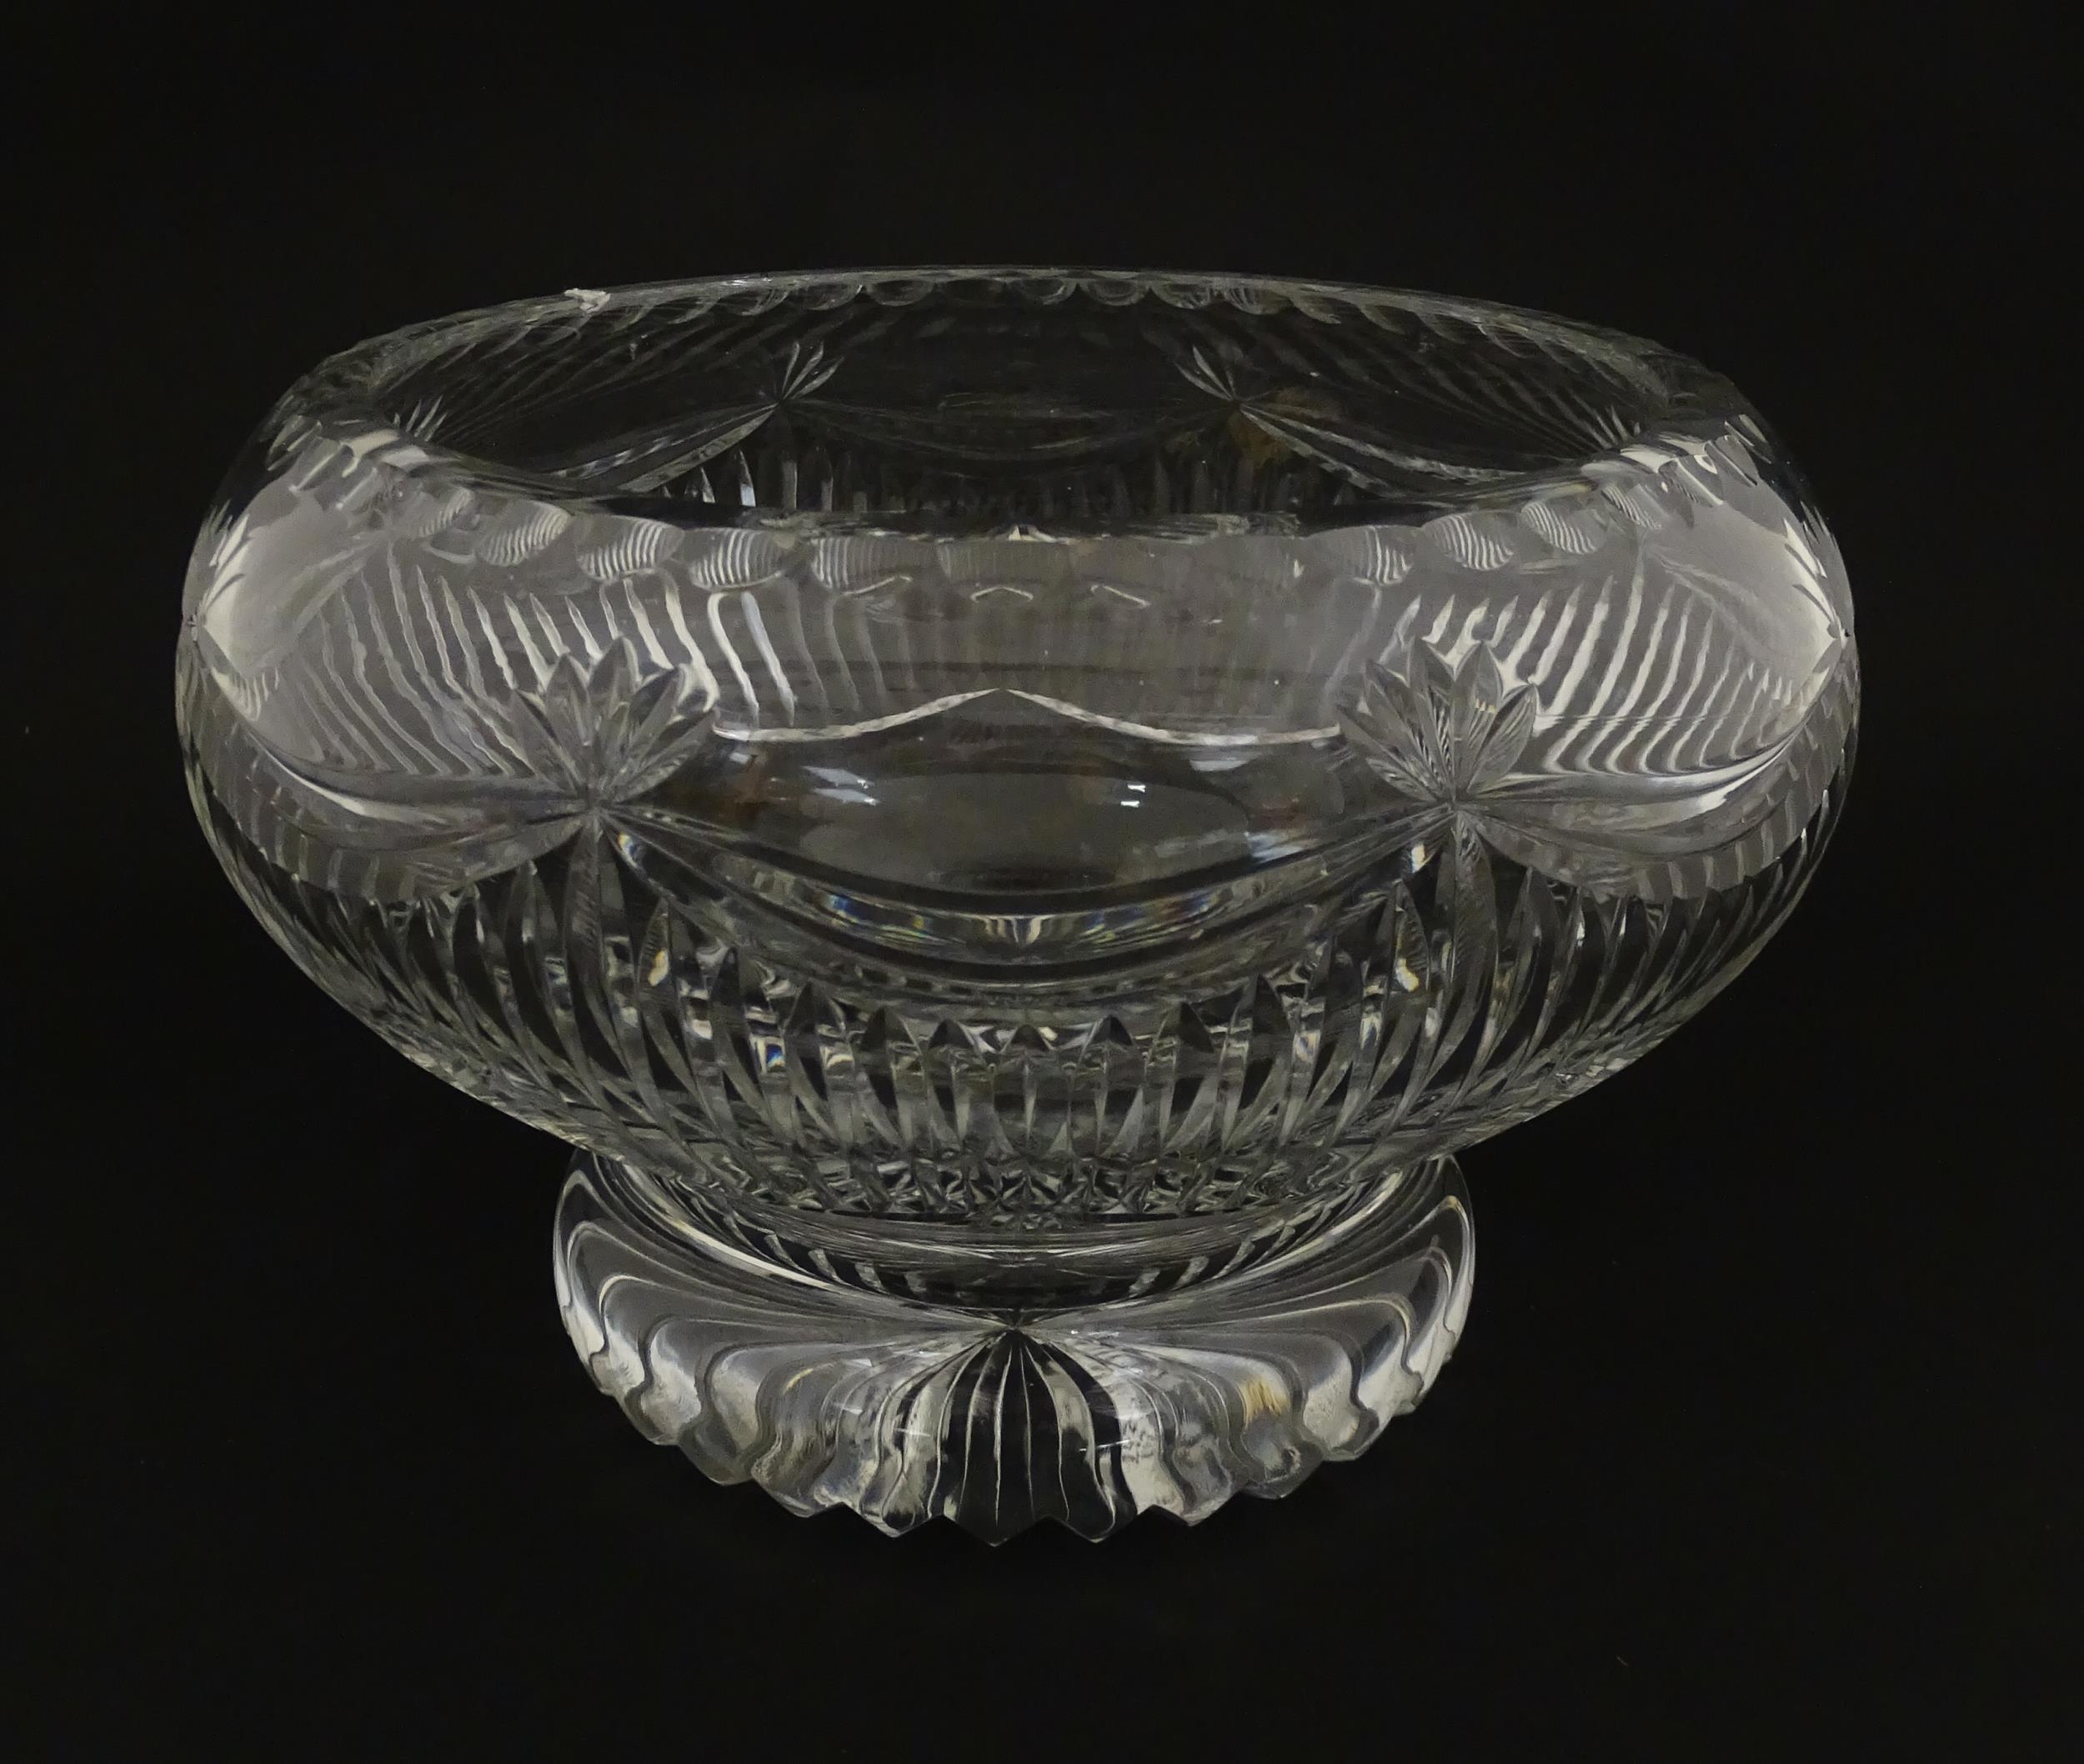 A cut crystal glass bowl, possibly Waterford. Approx. 6 1/2" high Please Note - we do not make